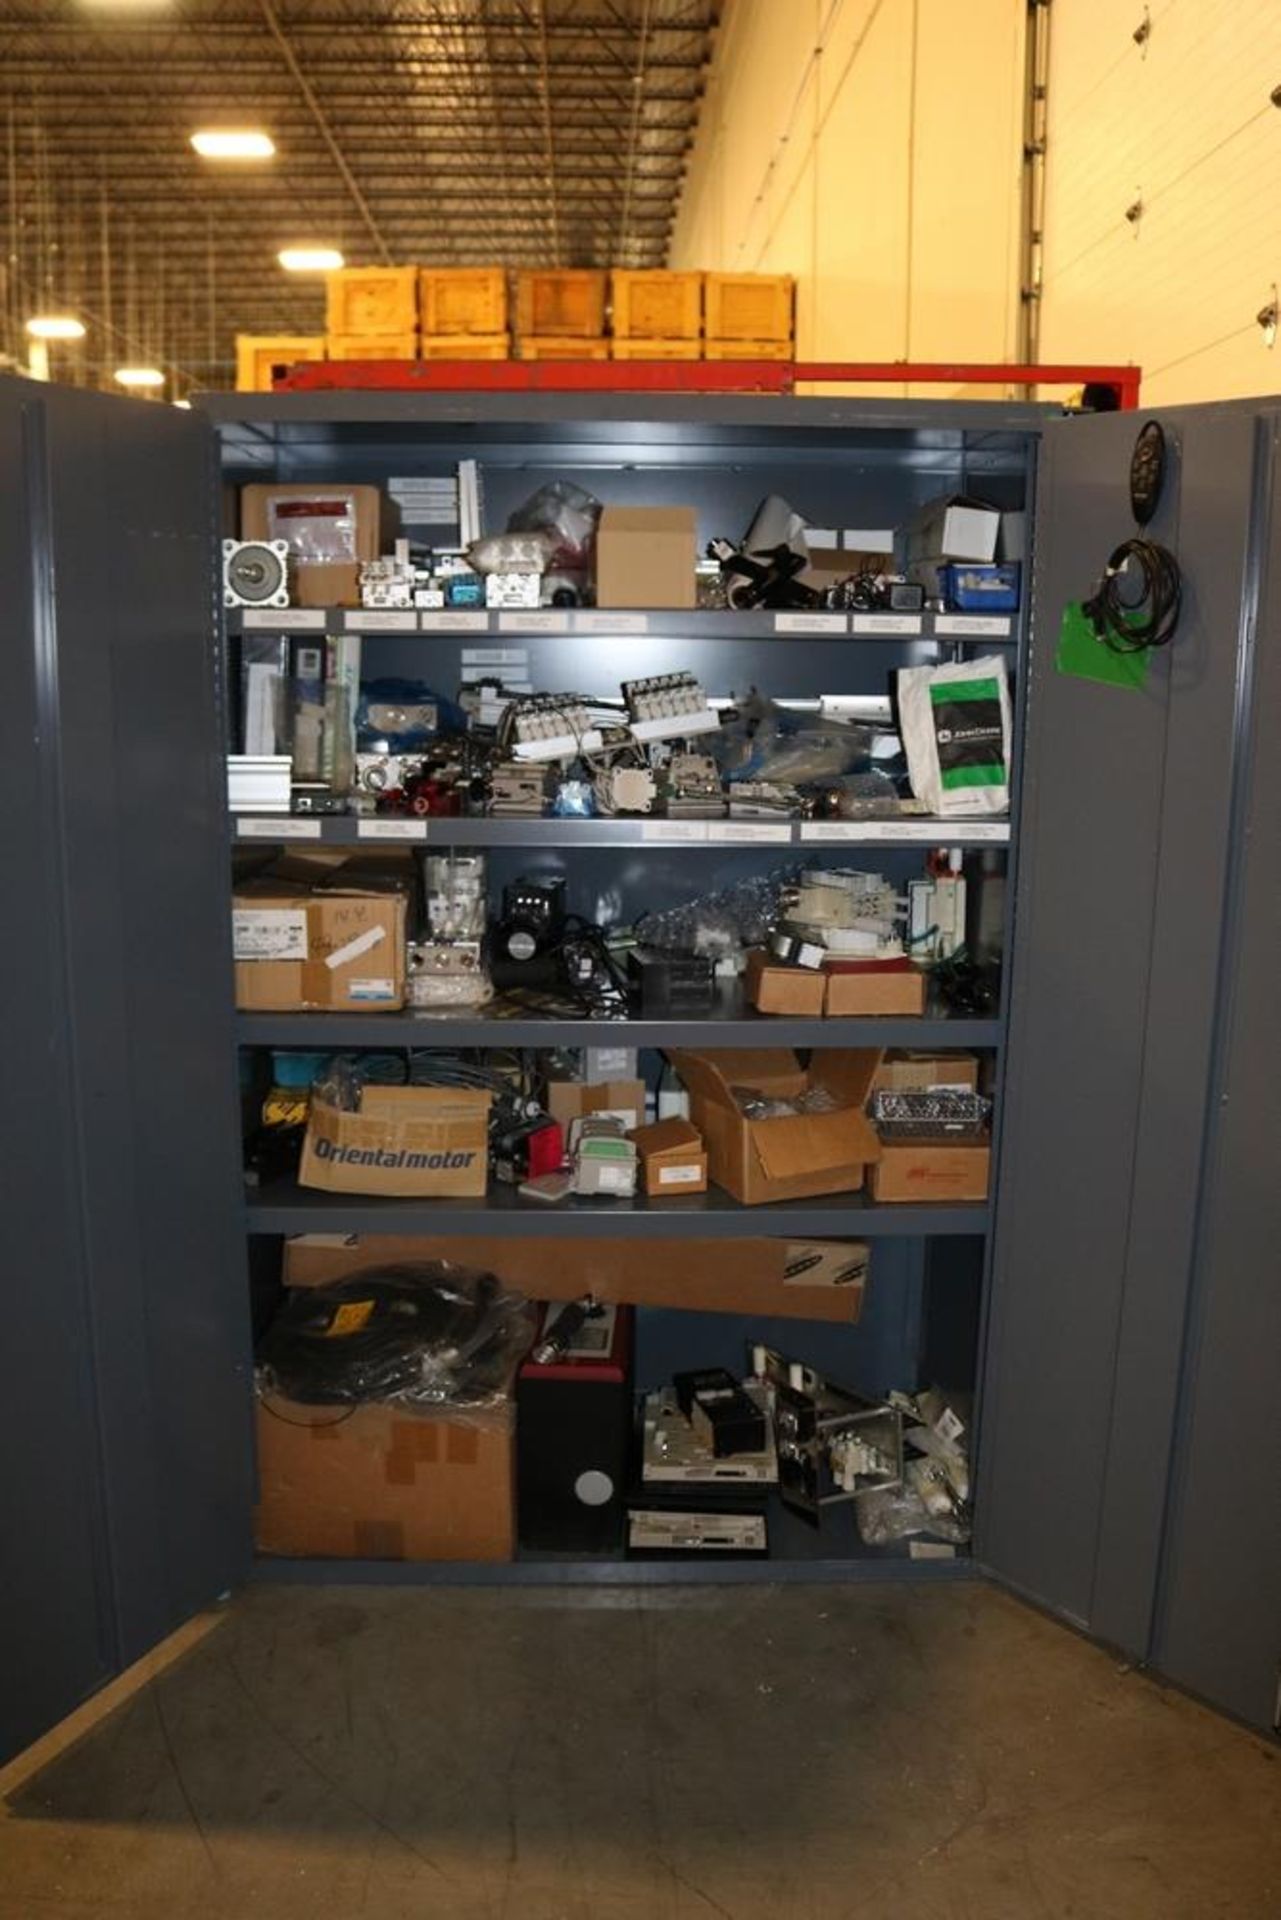 Durham MFG 5 Tier Metal Cabinet w/ Contents Replacement Parts for Protech Line Drive Unit & Others - Image 2 of 12